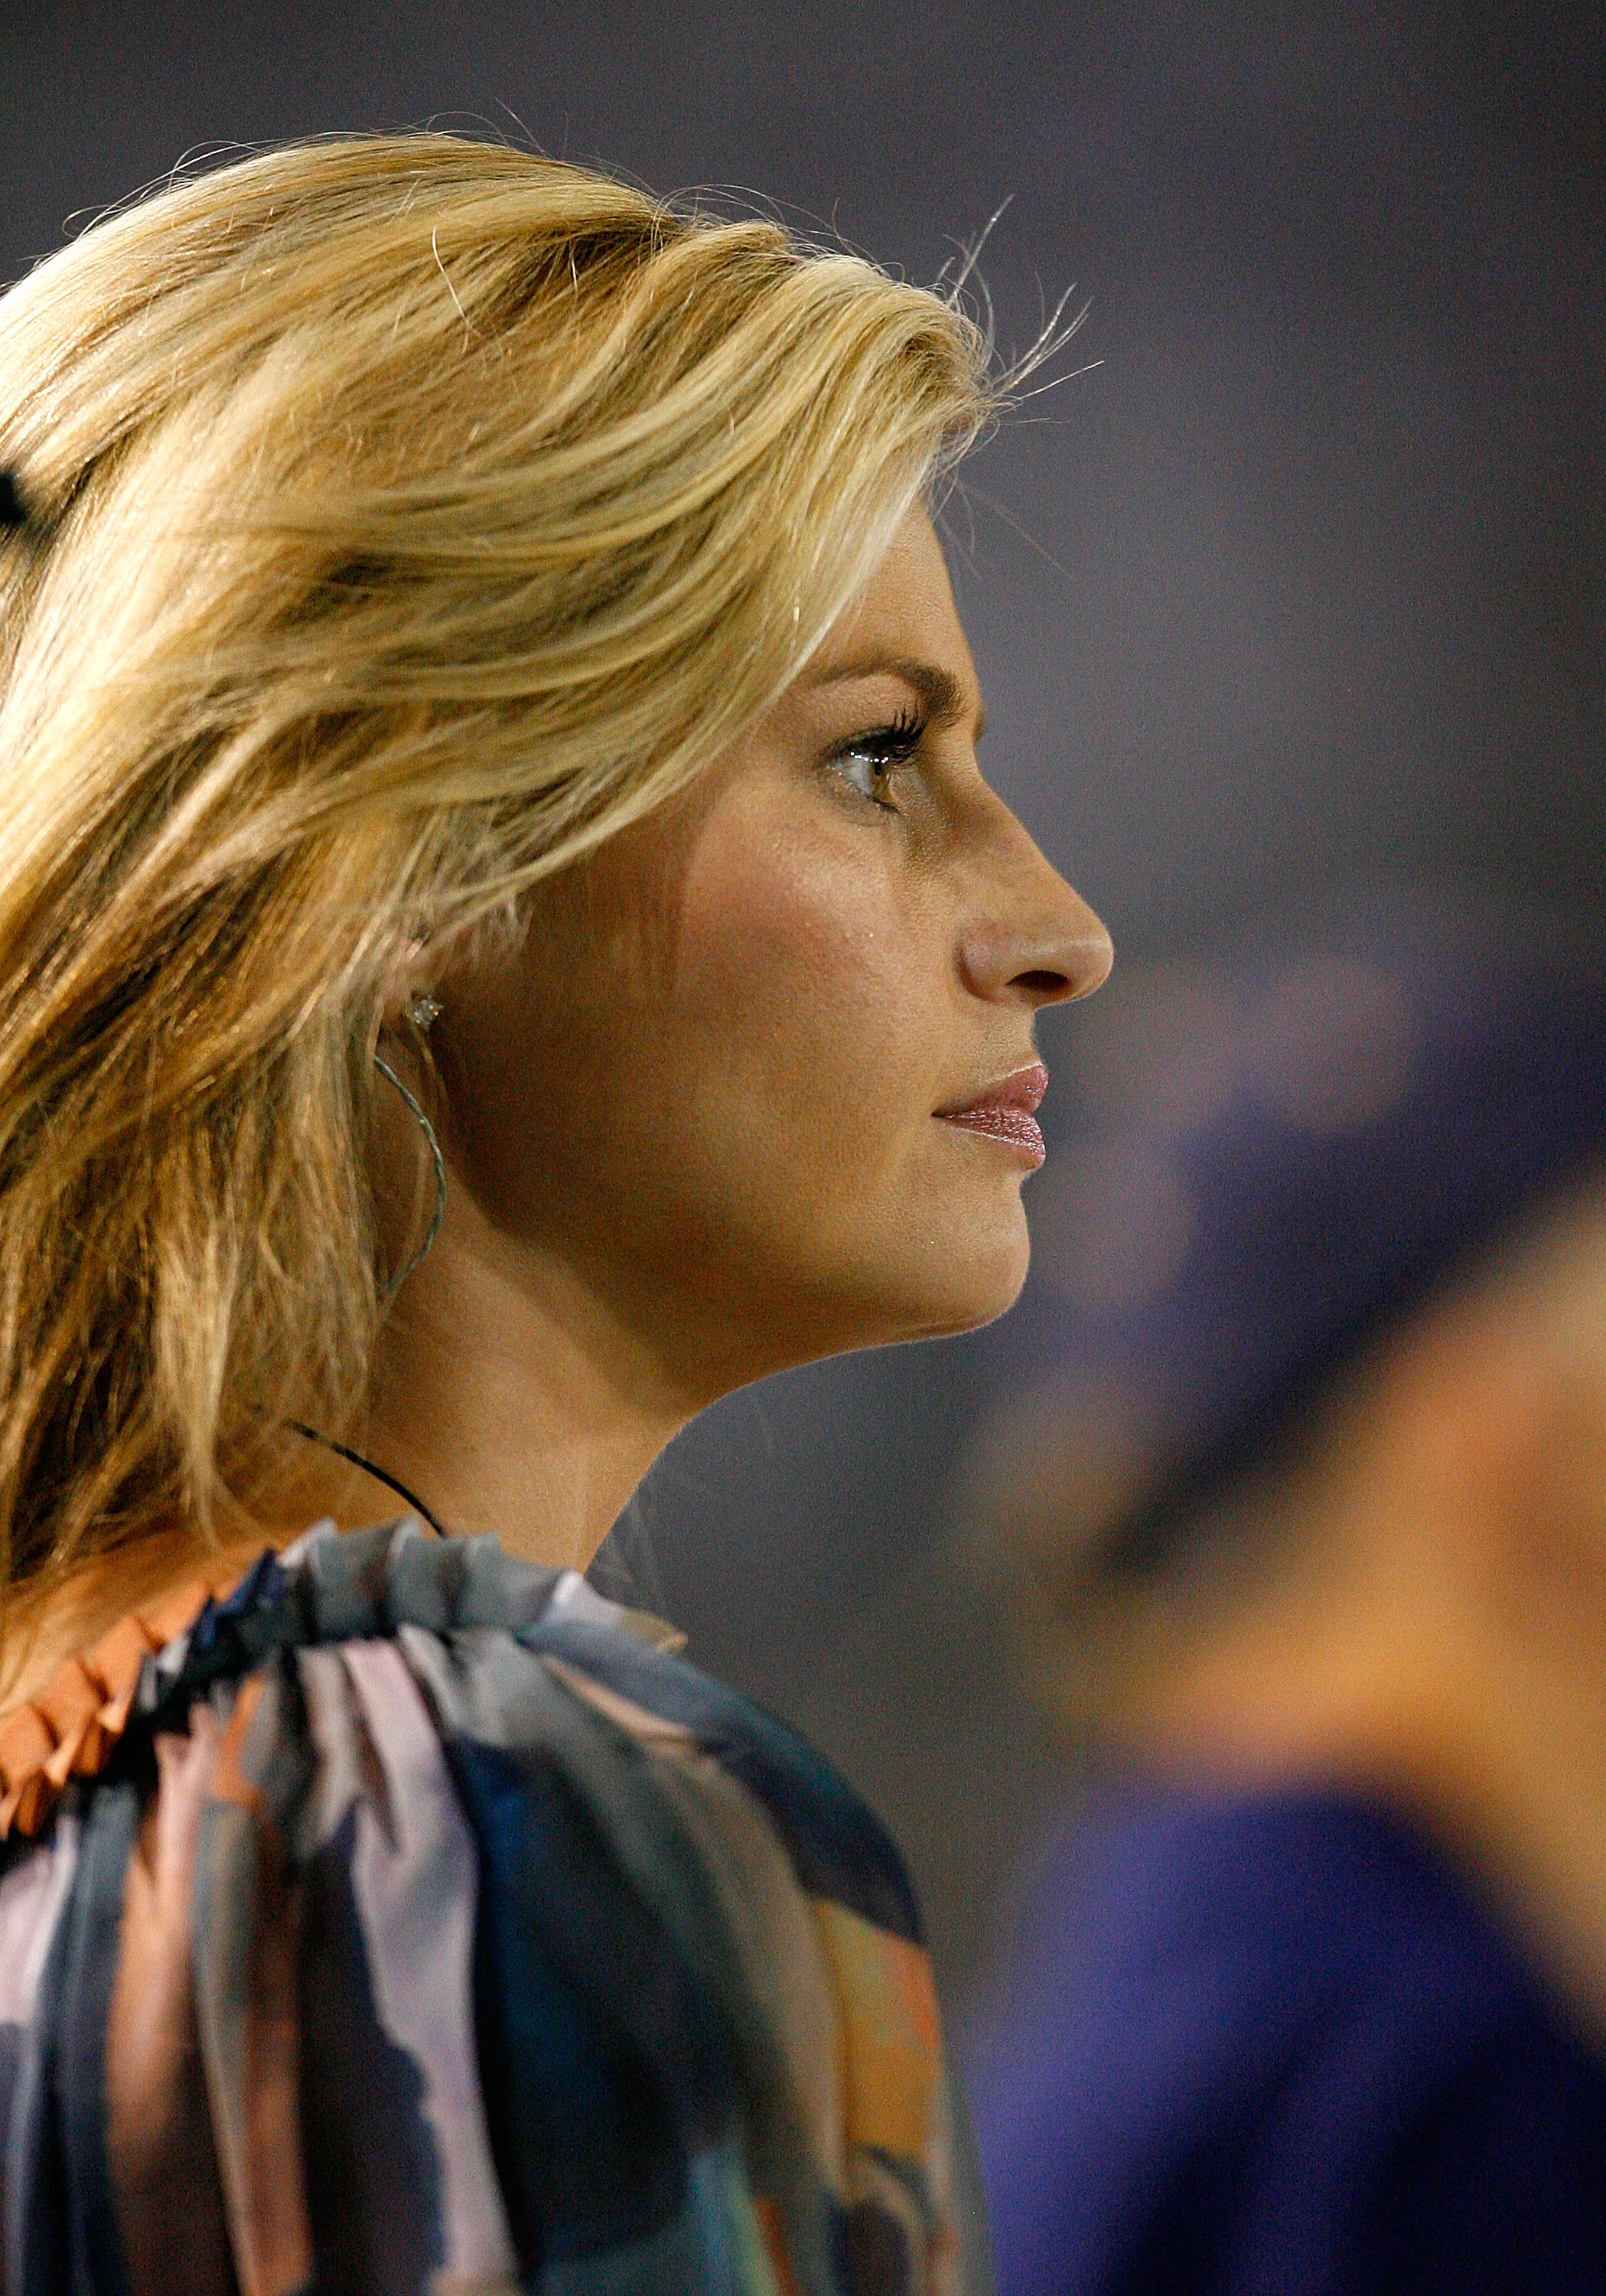 ATLANTA - SEPTEMBER 10:  ESPN sportscaster Erin Andrews watches the Clemson Tigers face the Georgia Tech Yellow Jackets at Bobby Dodd Stadium on September 10, 2009 in Atlanta, Georgia.  (Photo by Kevin C. Cox/Getty Images)